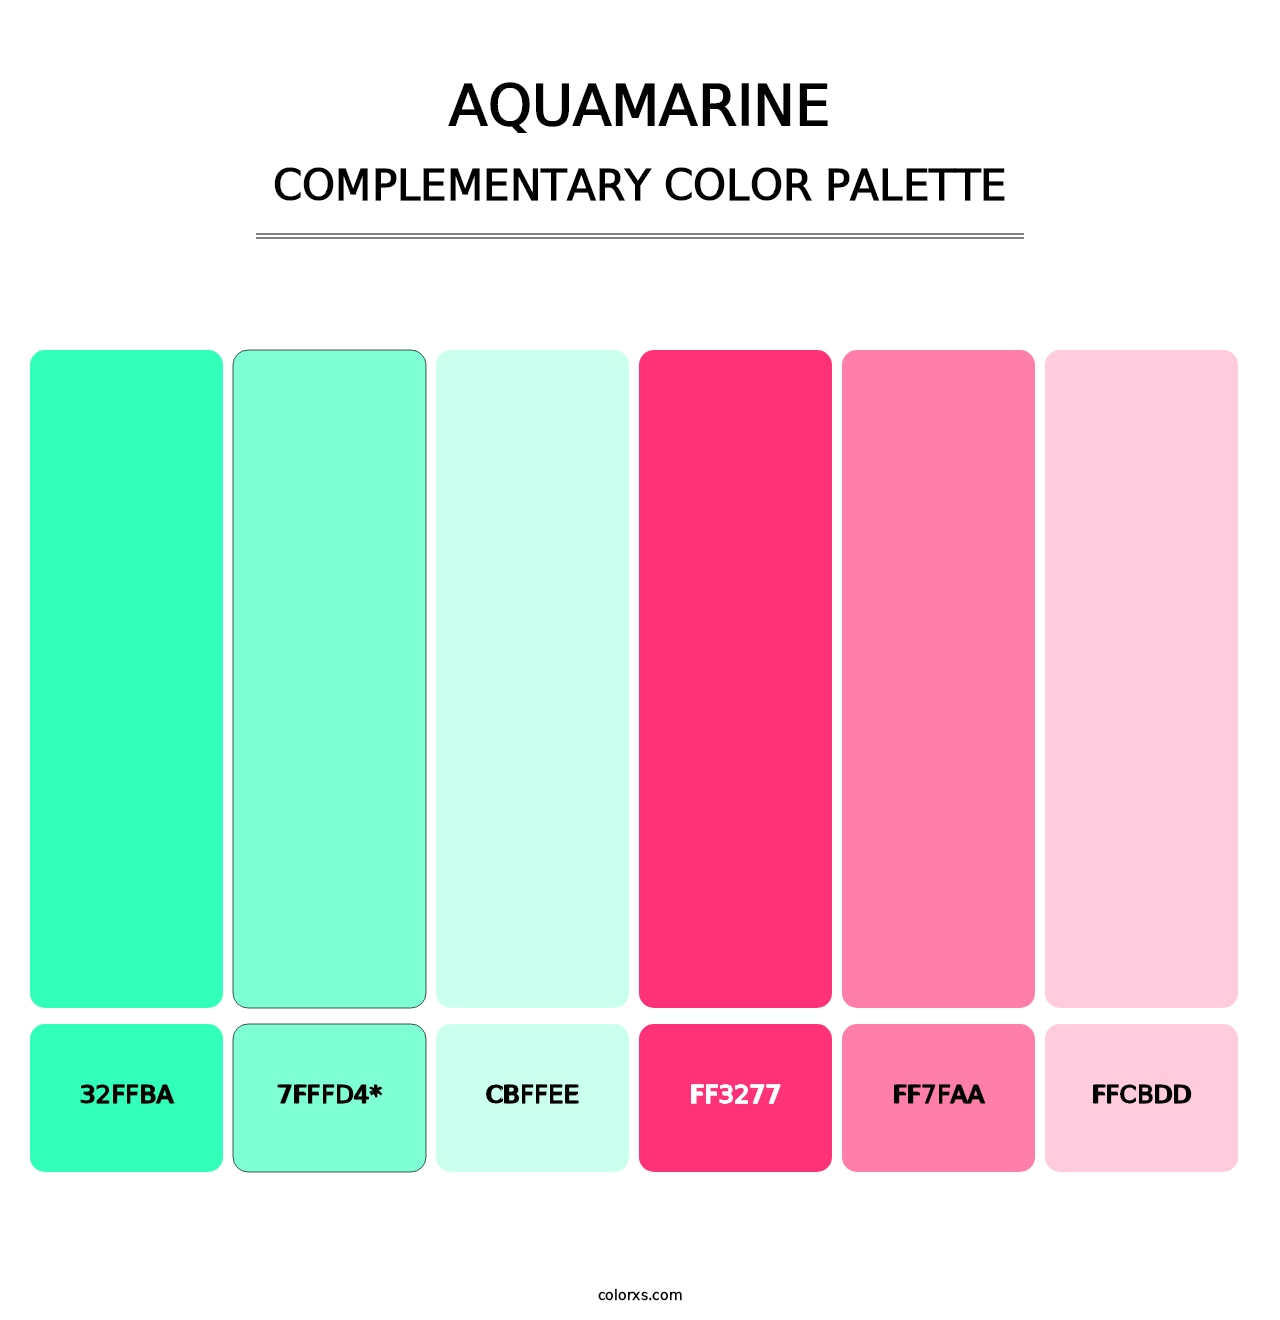 Aquamarine - Complementary Color Palette